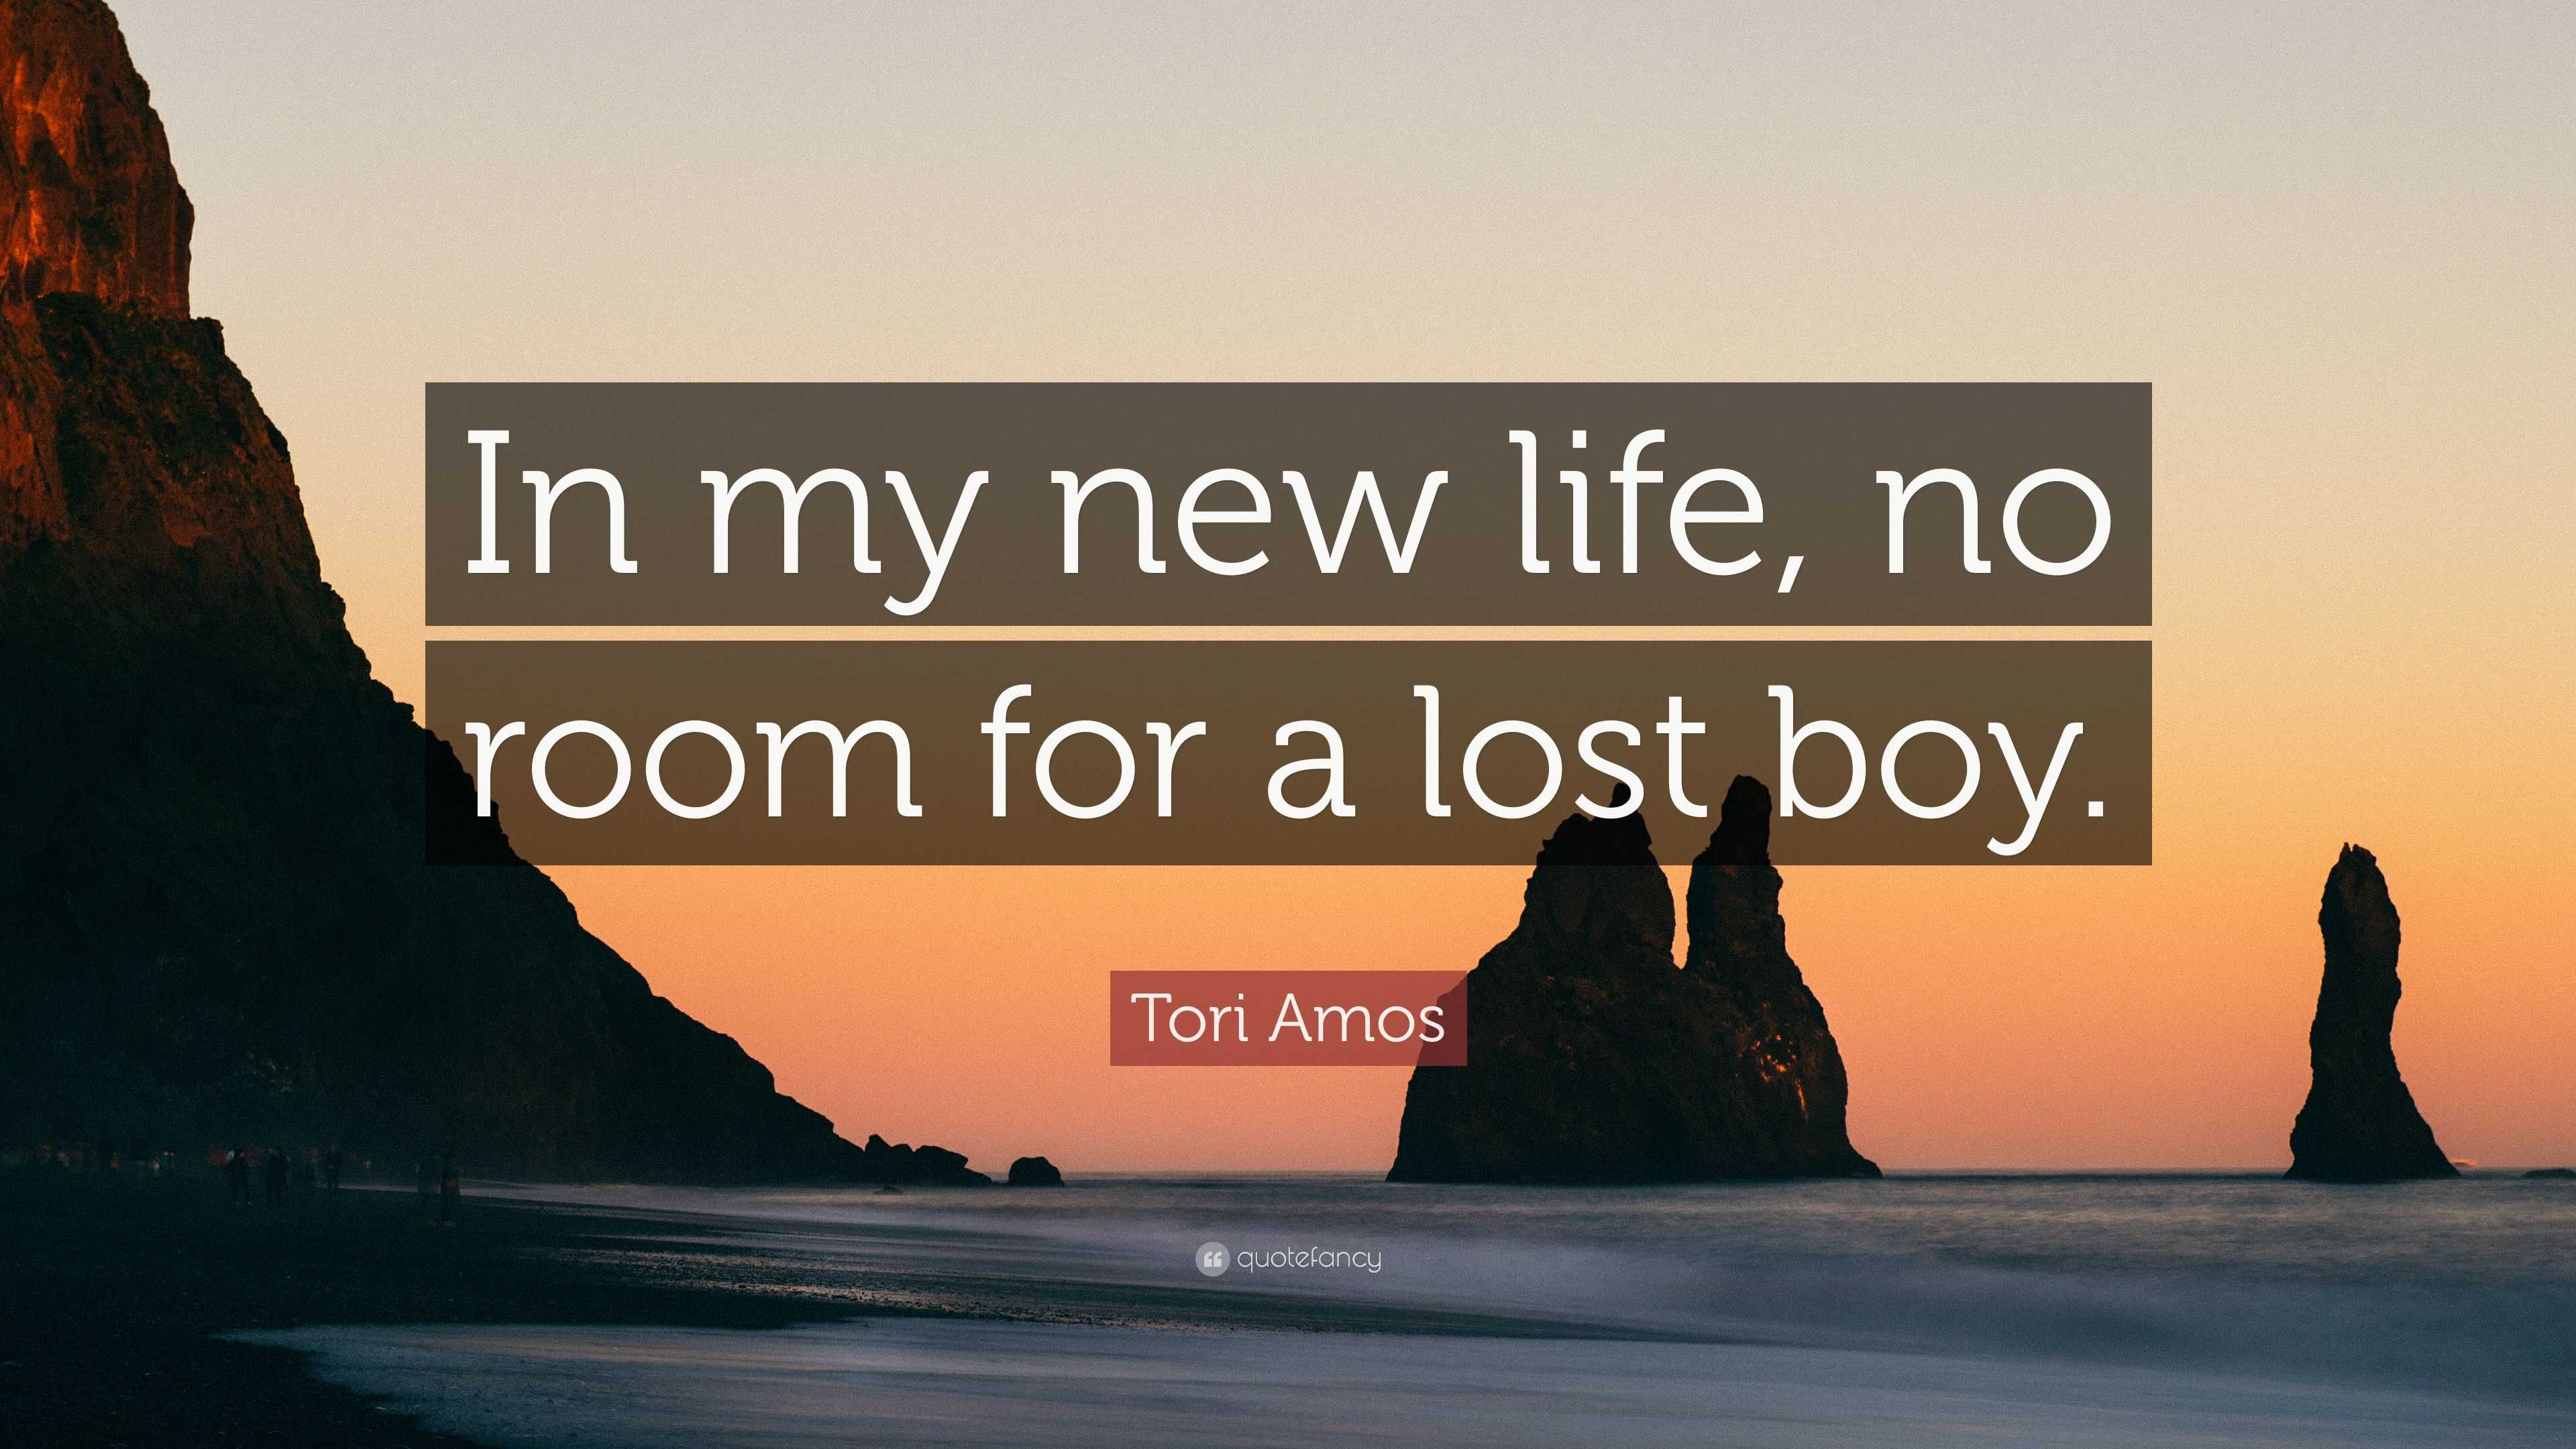 Tori Amos Quote “In my new life no room for a lost boy